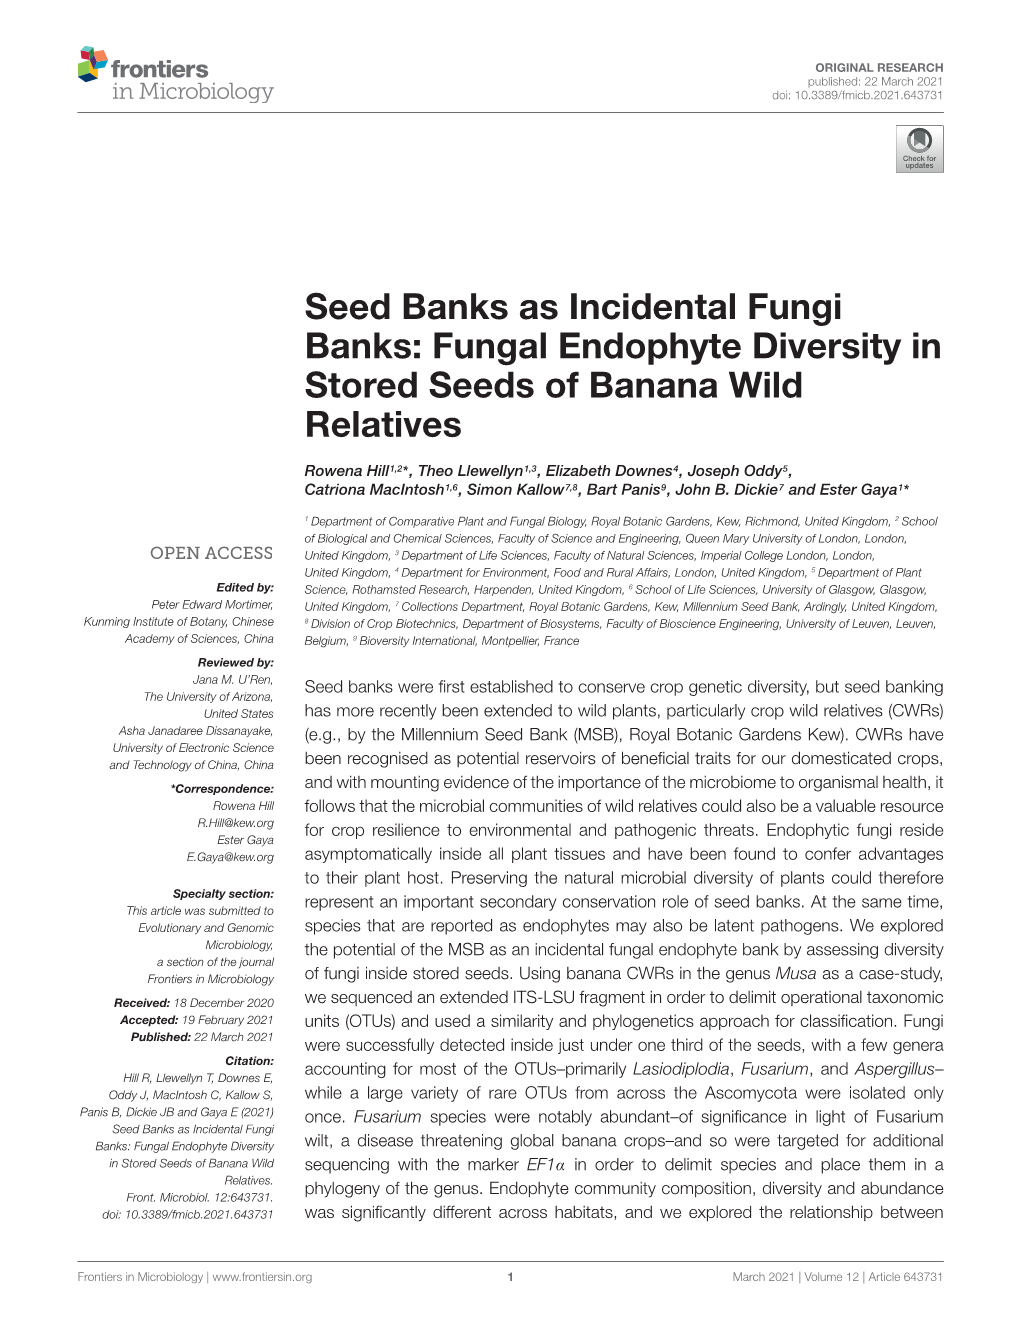 Seed Banks As Incidental Fungi Banks: Fungal Endophyte Diversity in Stored Seeds of Banana Wild Relatives